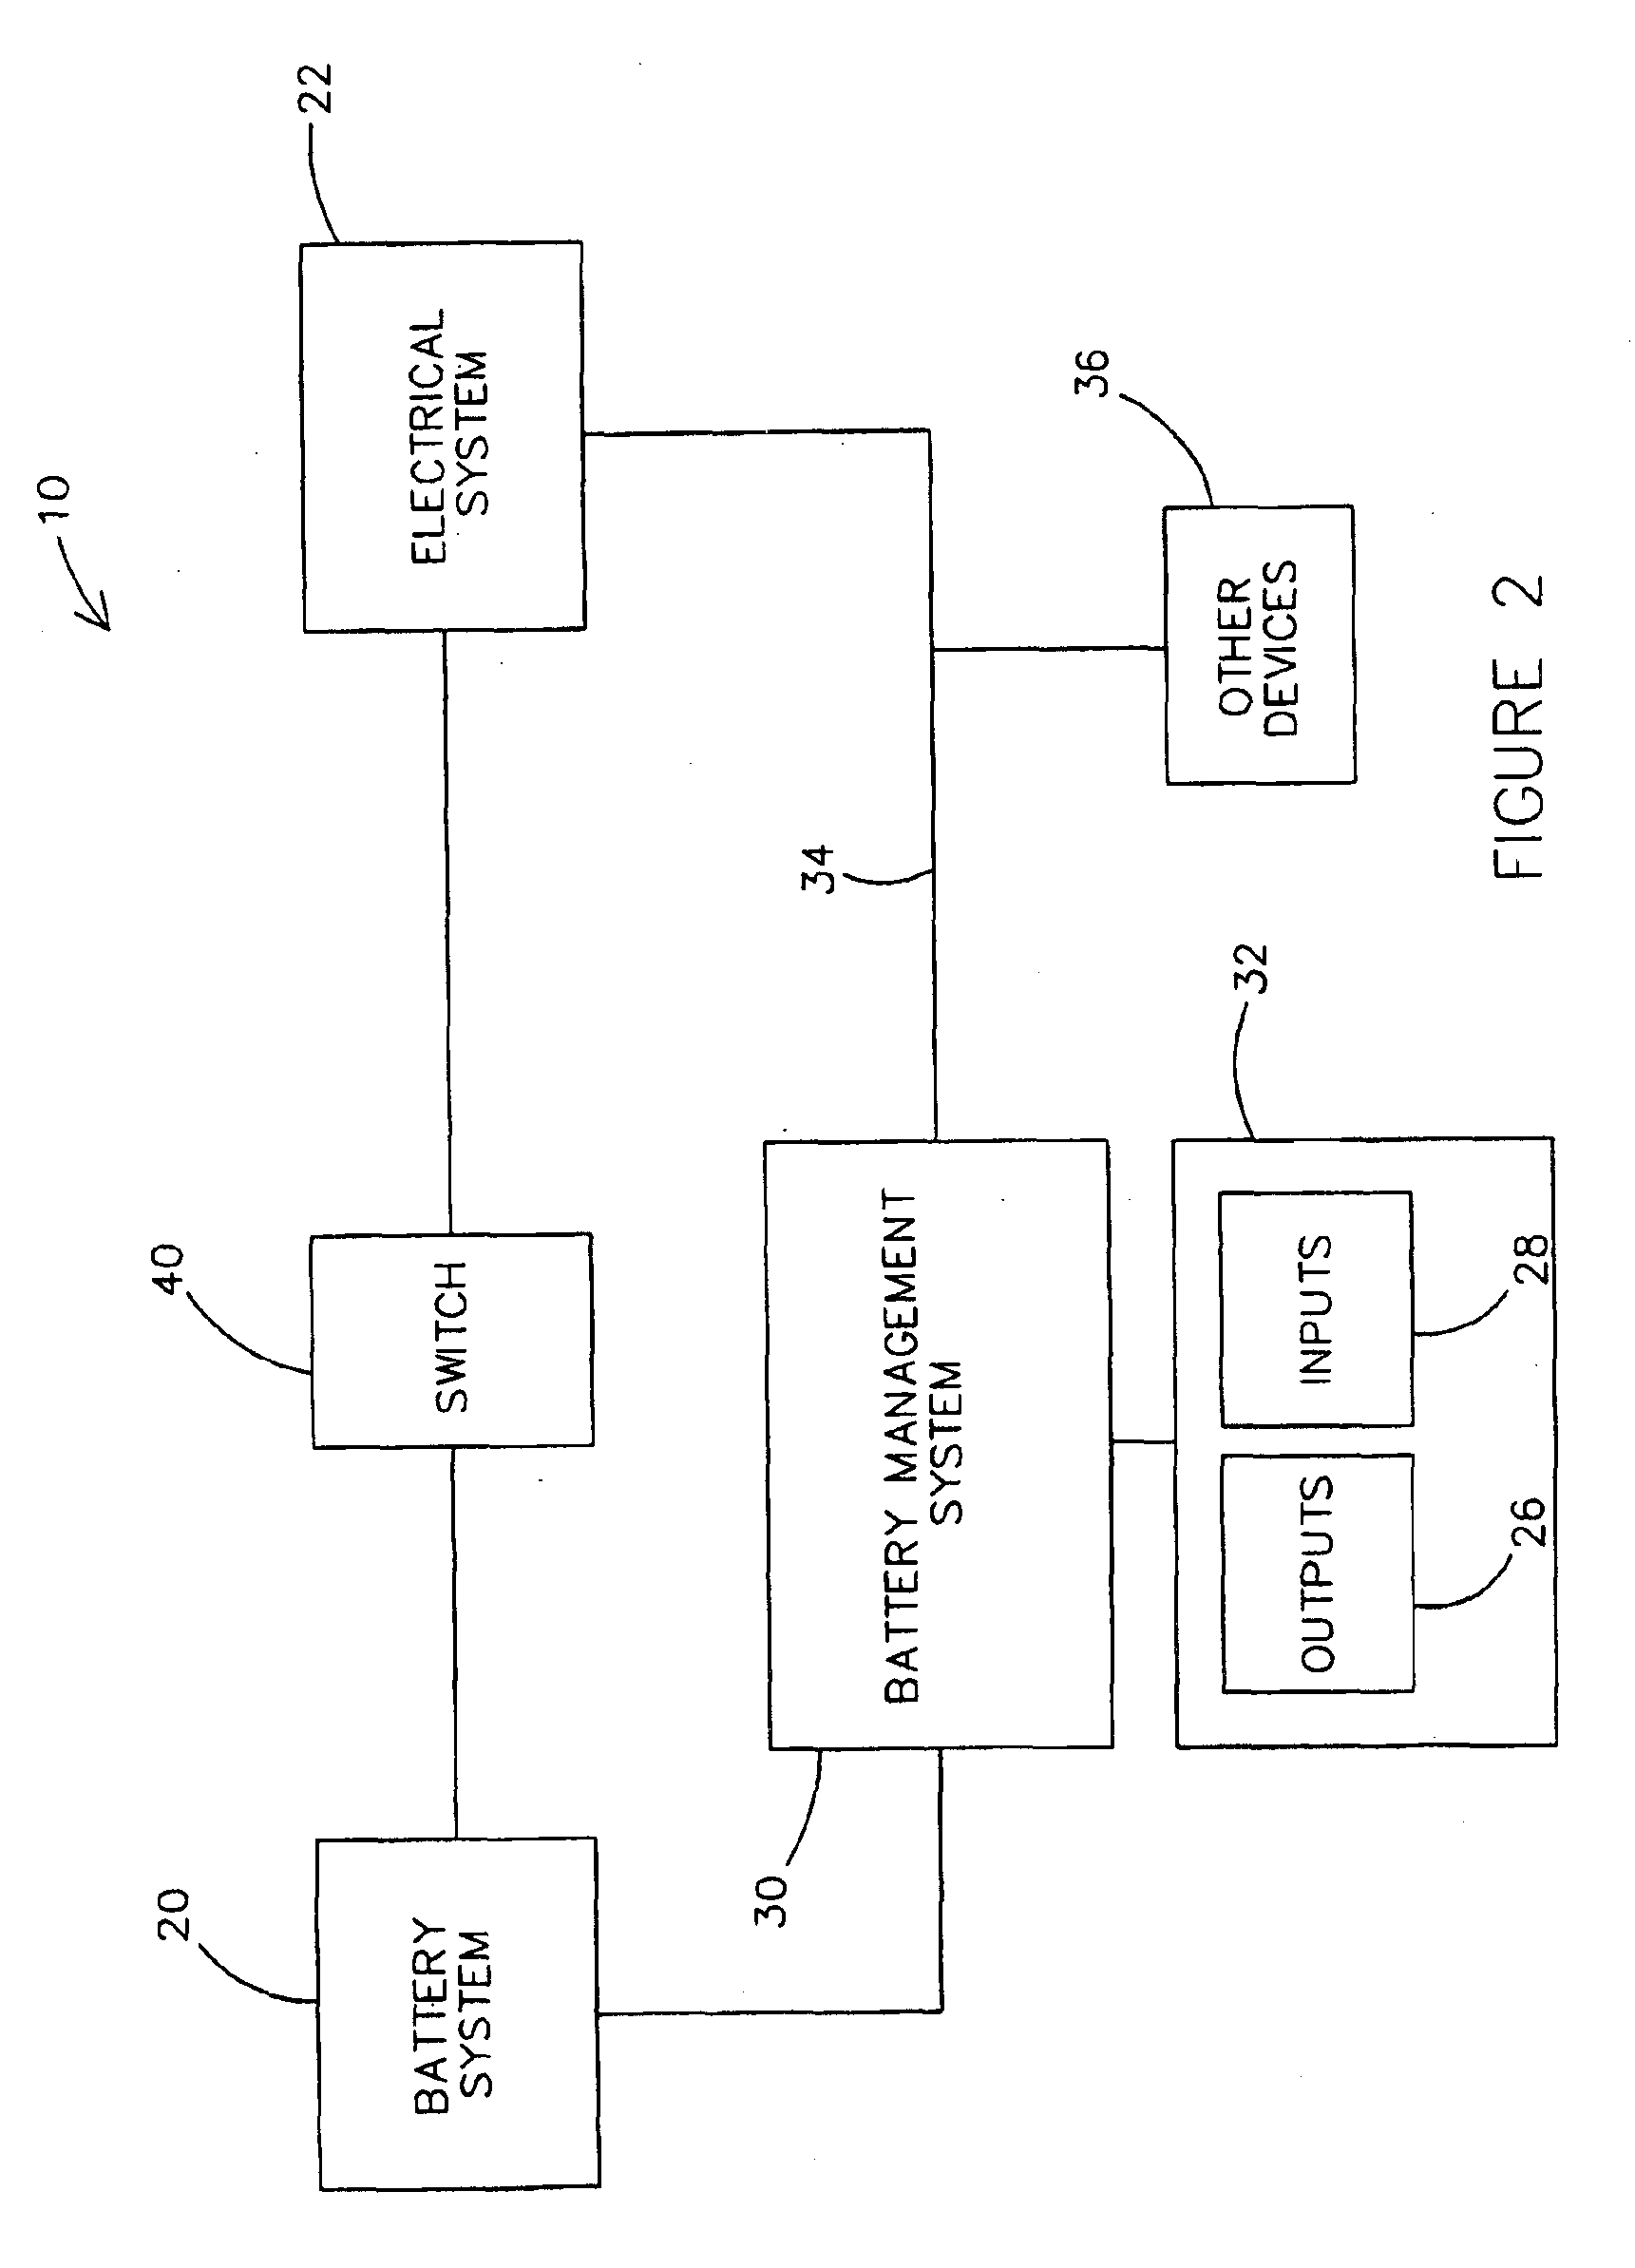 Battery monitoring system and method